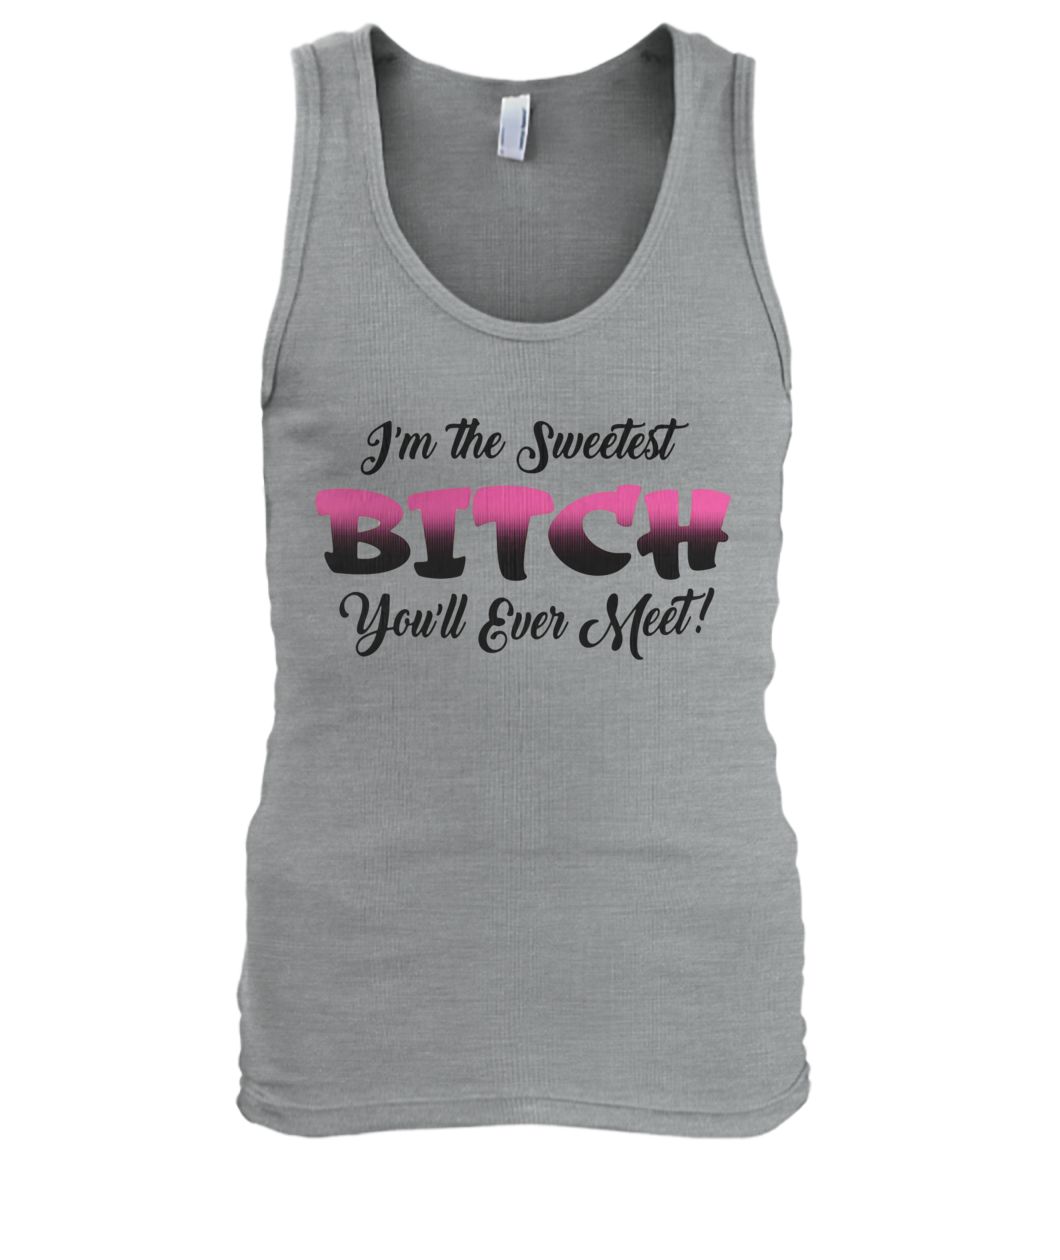 I'm the sweetest bitch you'll ever meet men's tank top